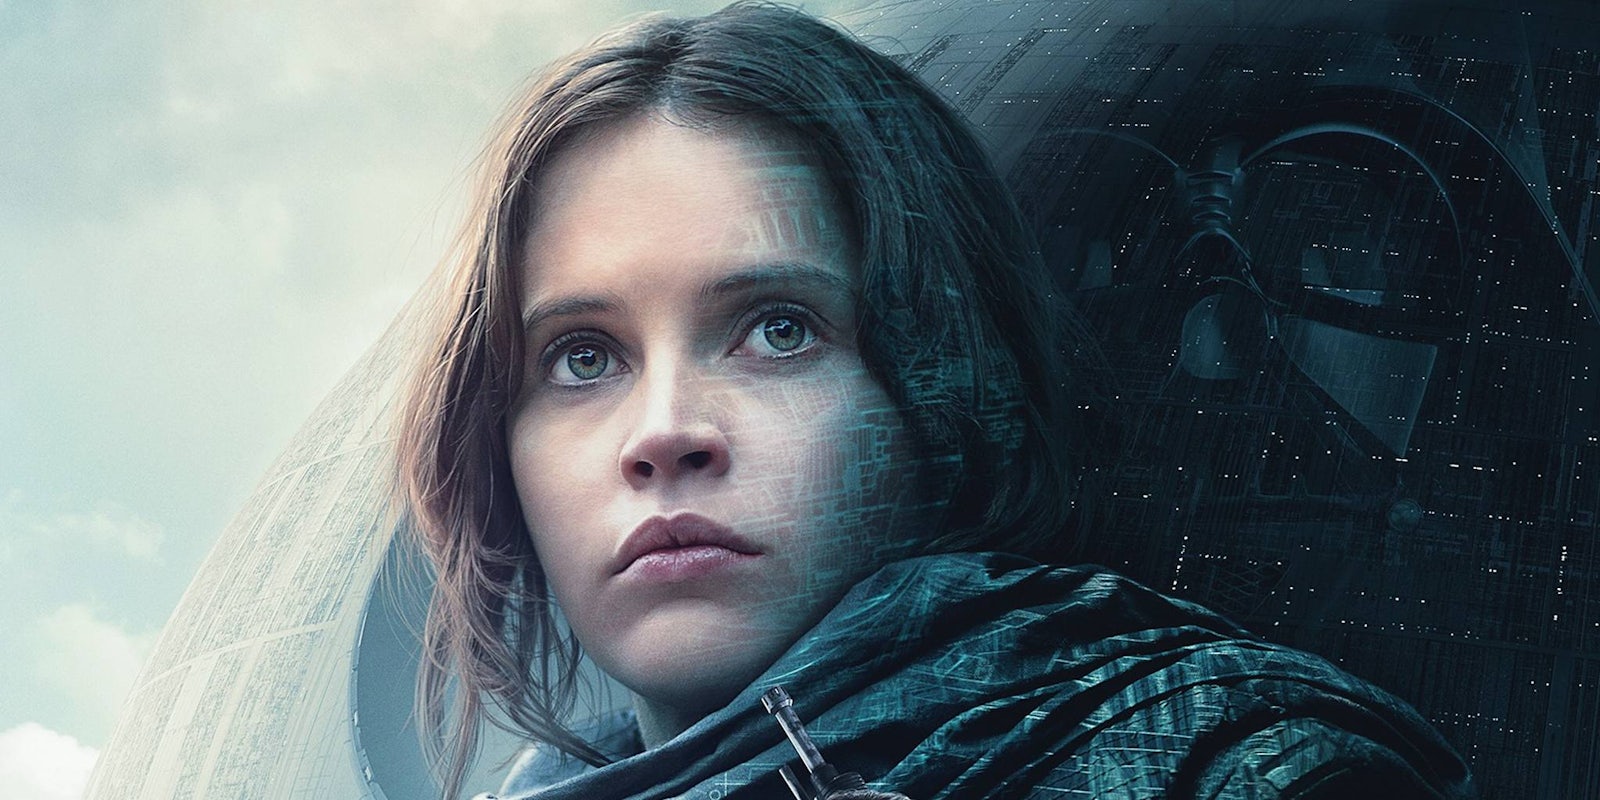 whats new on netflix: Rogue One: A Star Wars Story